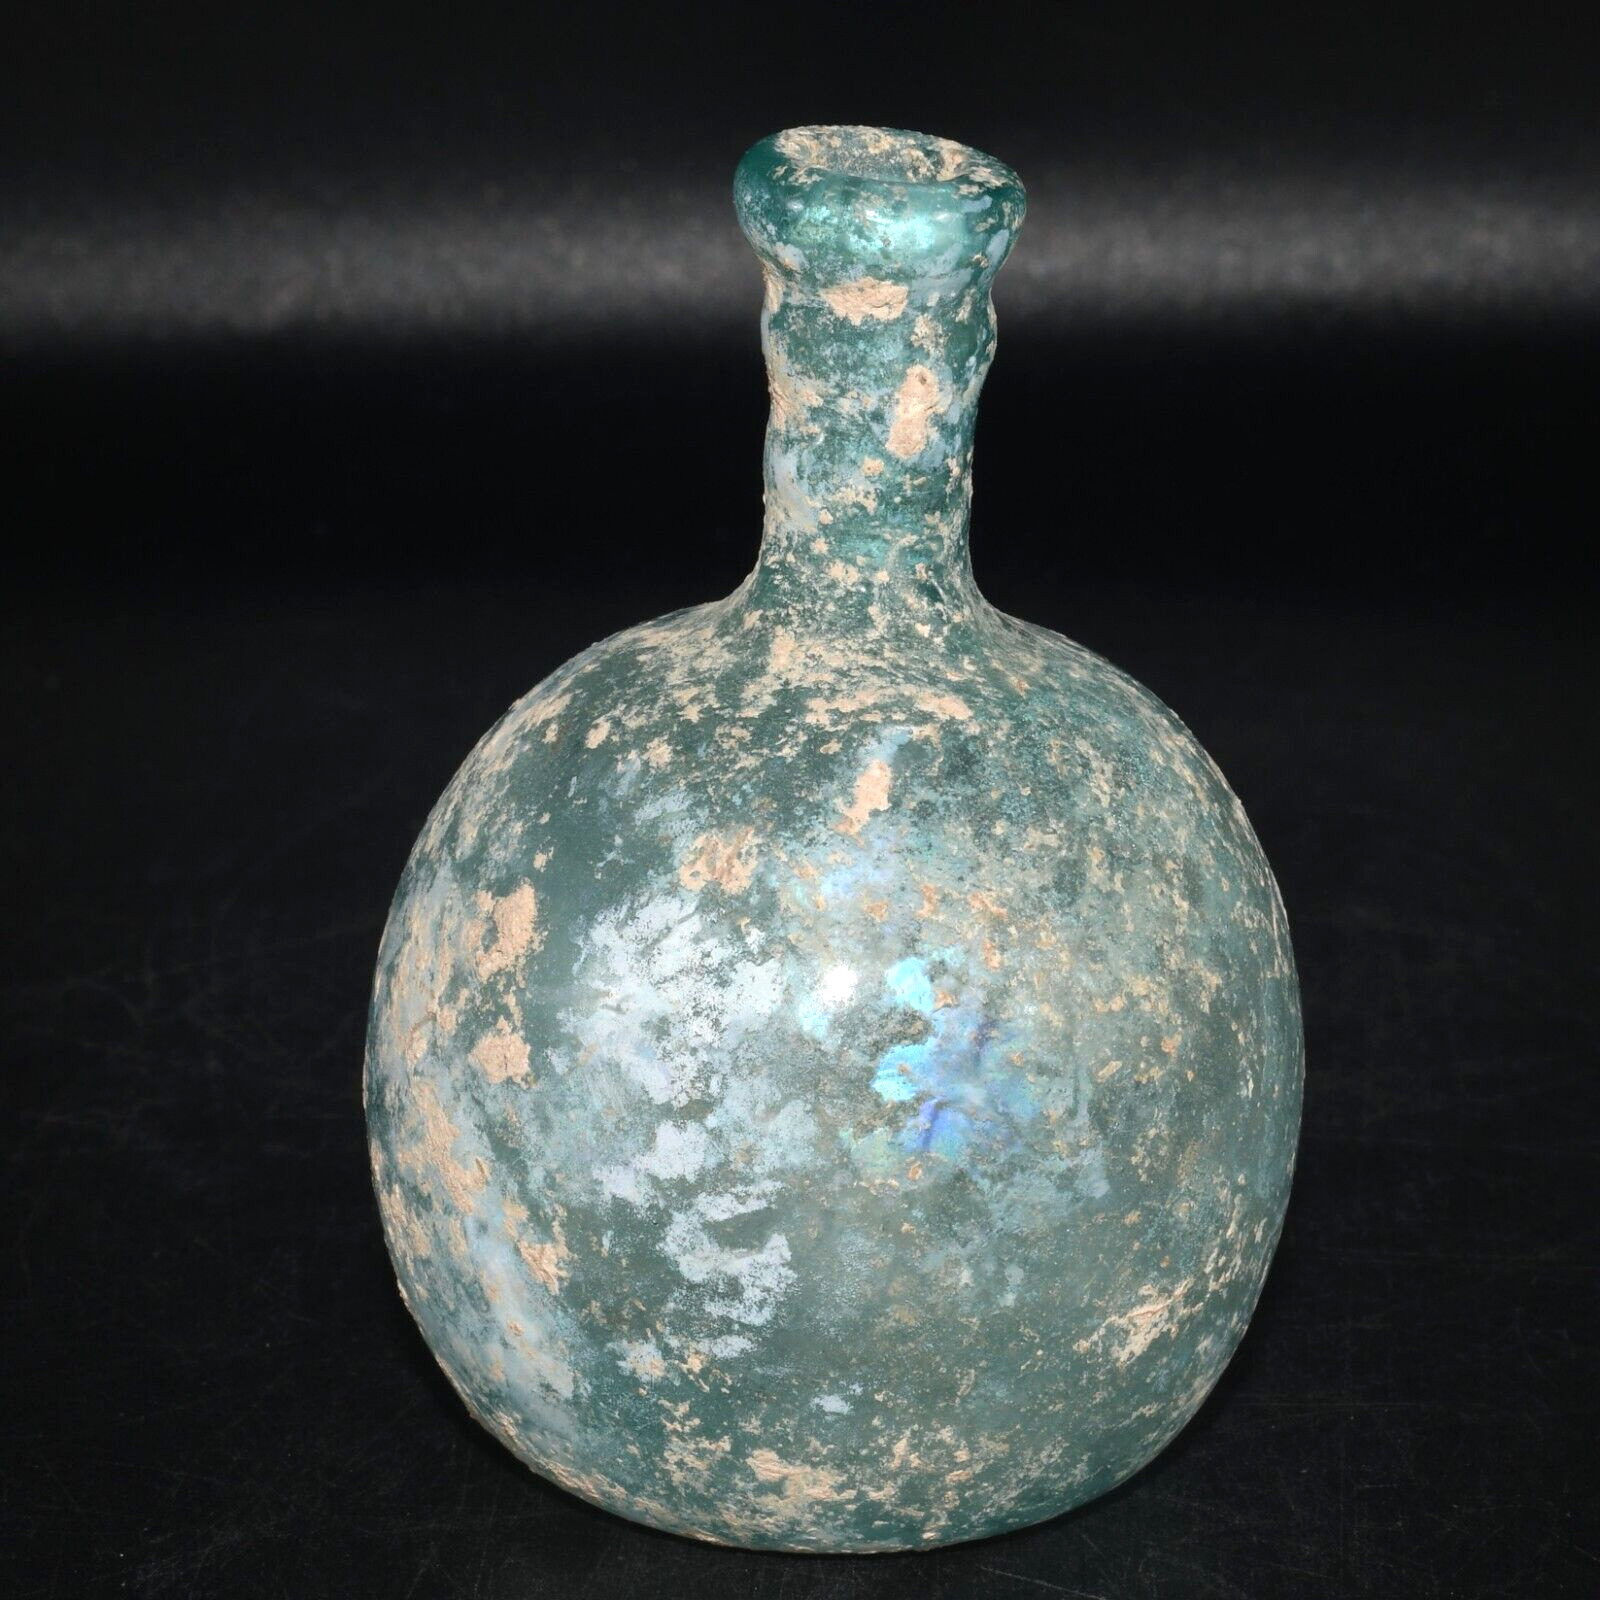 Intact Ancient Roman Glass Flask Bottle with Iridescent Patina C. 2nd Century AD